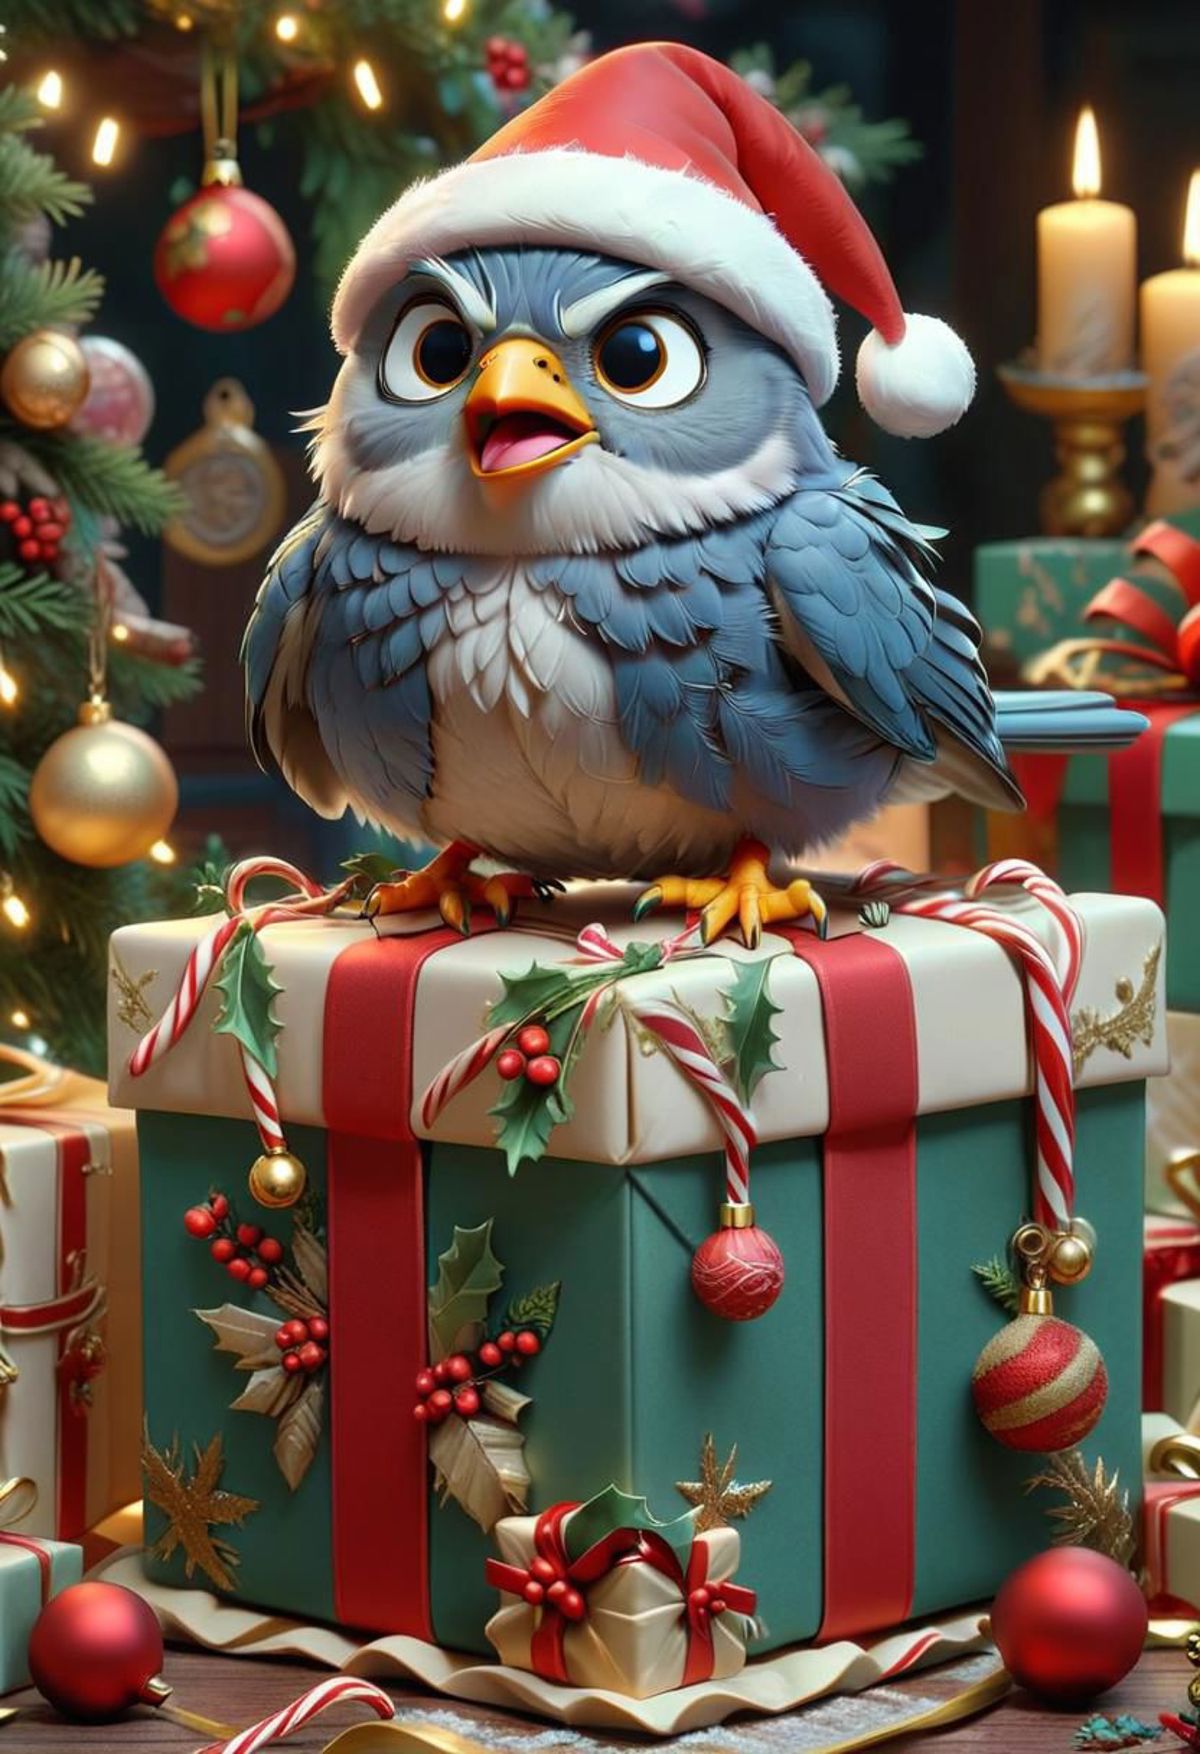 A blue and gray bird wearing a Santa hat sitting on top of a gift wrapped in red and white ribbon.